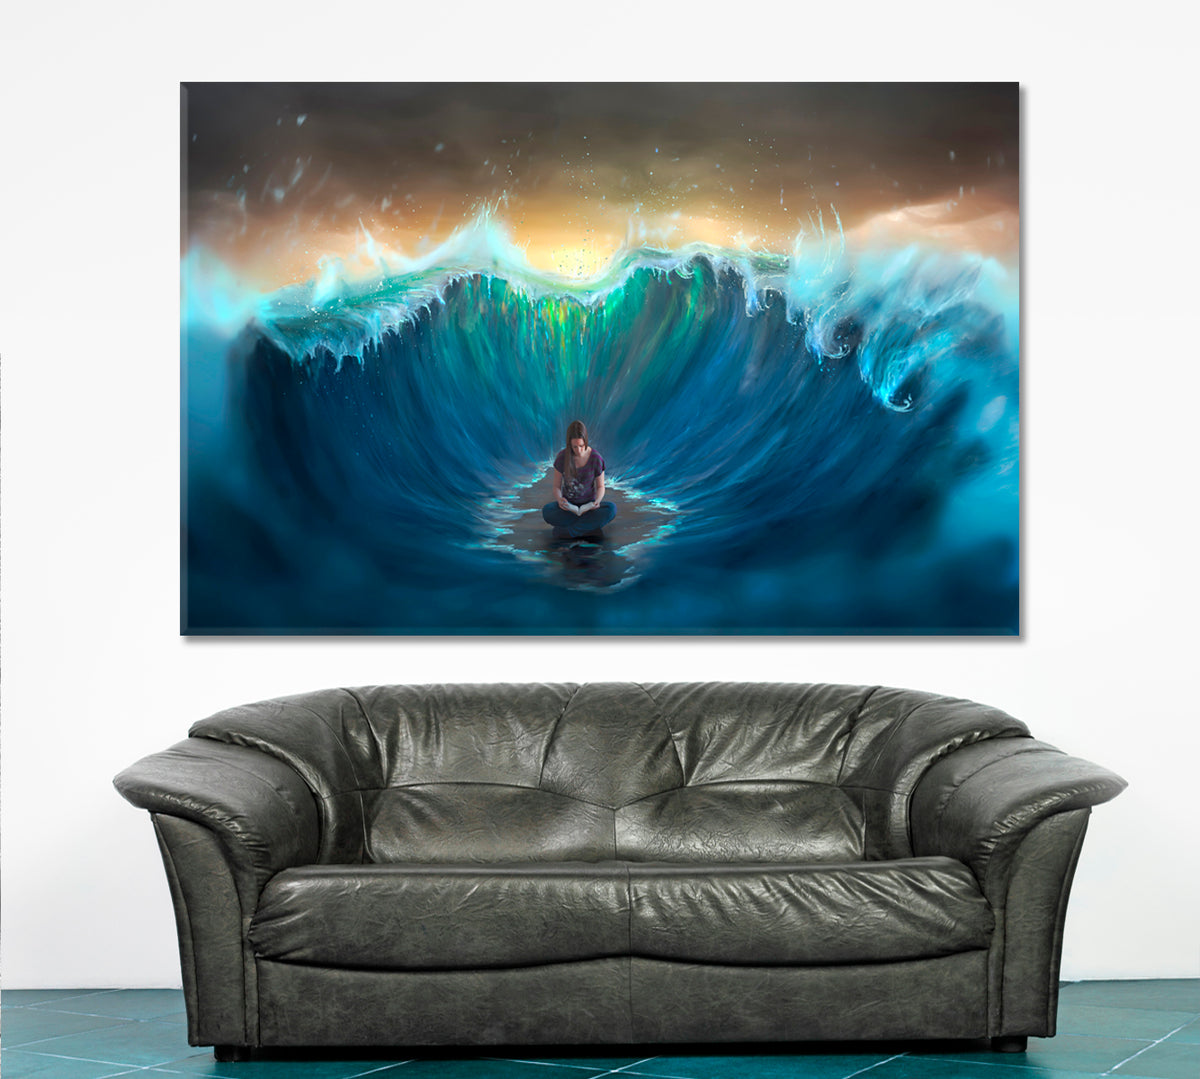 Woman Surrounded By Sea Waves Motivation Sport Poster Print Decor Artesty 1 panel 24" x 16" 